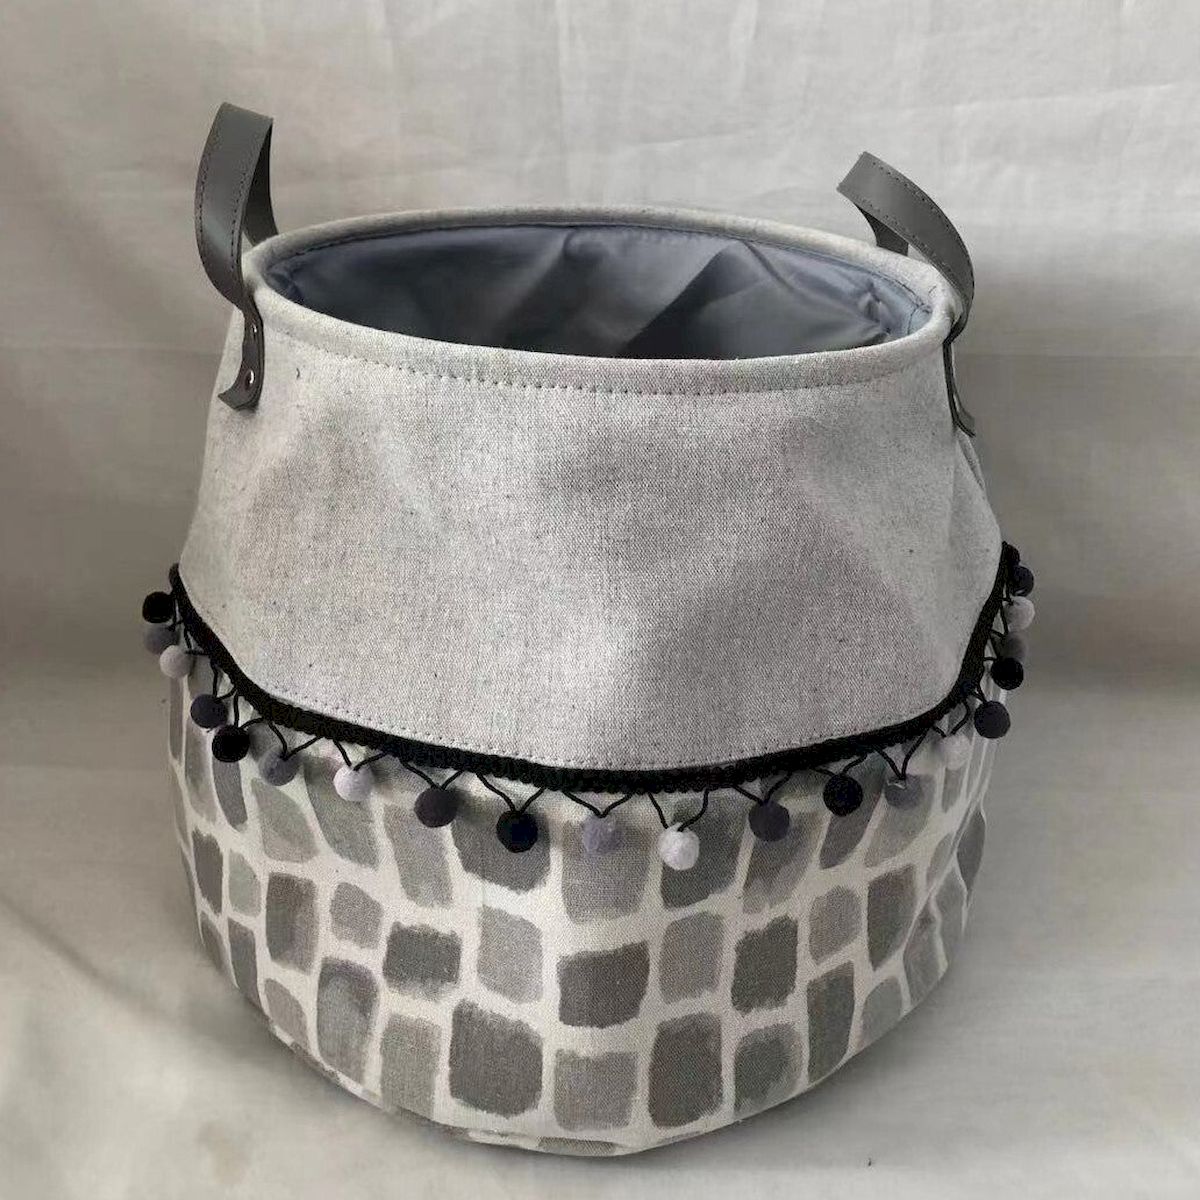 Picture of Mr. MJs Trading AI-2040-213 Gray Top with Gray Squares & Black Pom Pom Trim Handled Basket